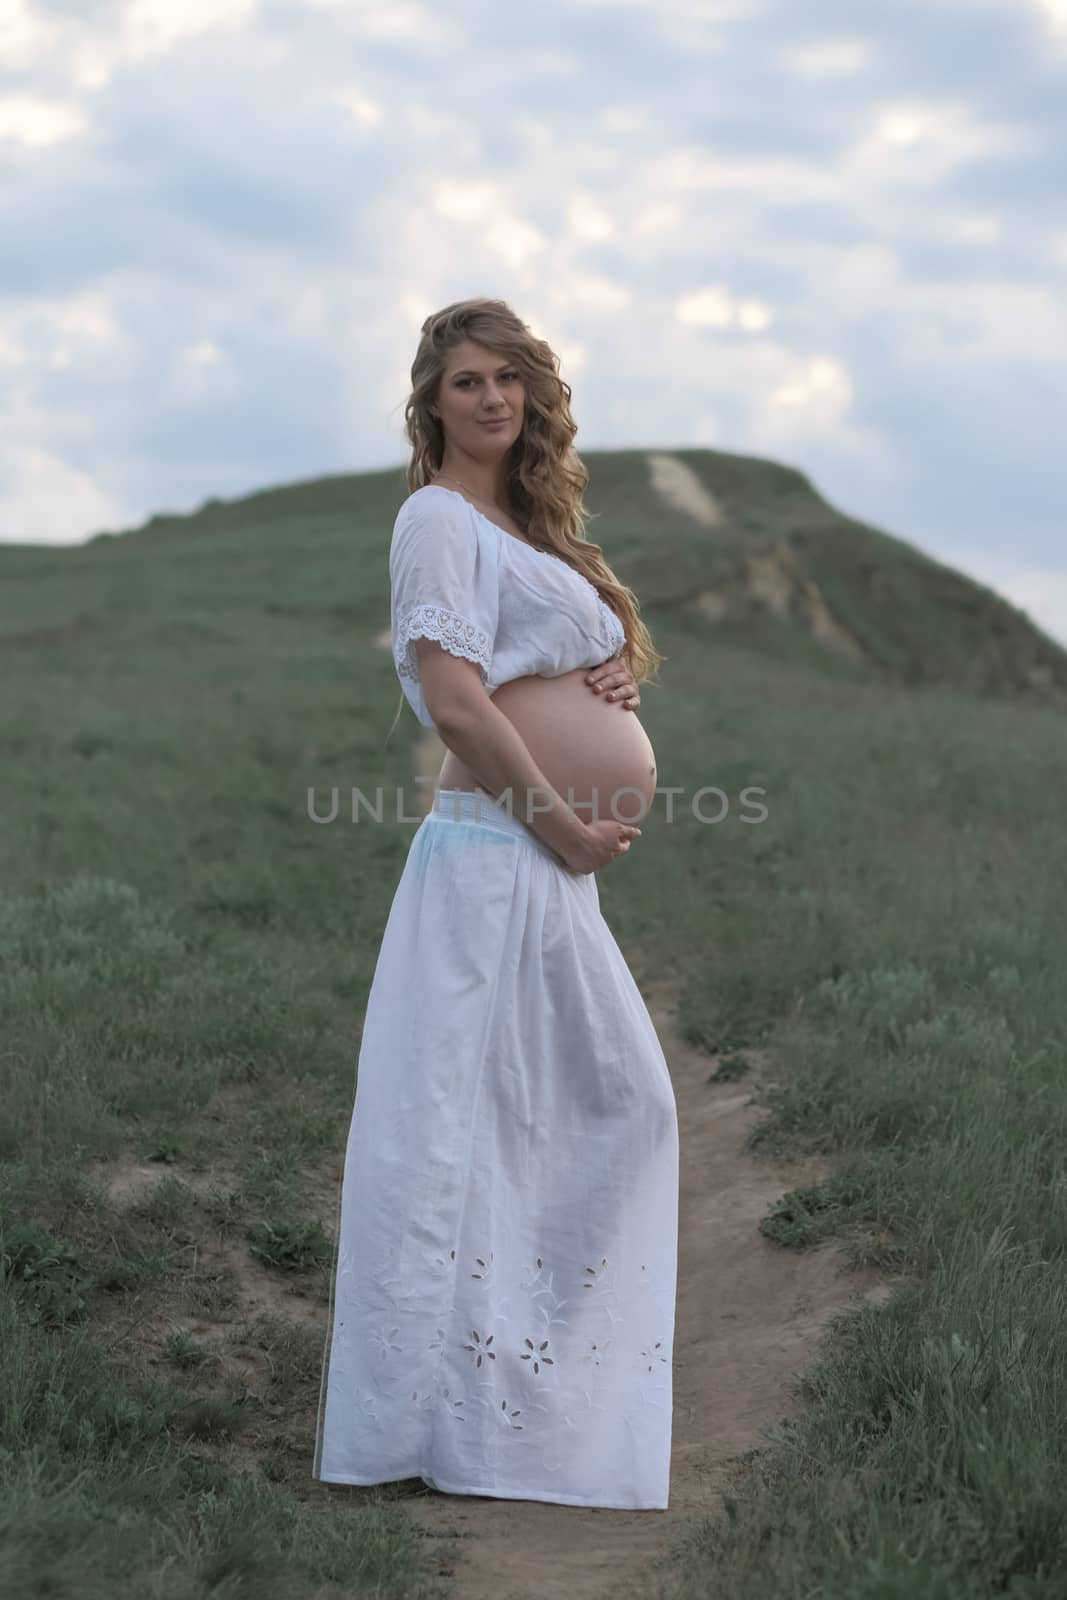 A pregnant girl in white is waiting for her beloved stand by a hill with a beaten track. Rural natural landscape.